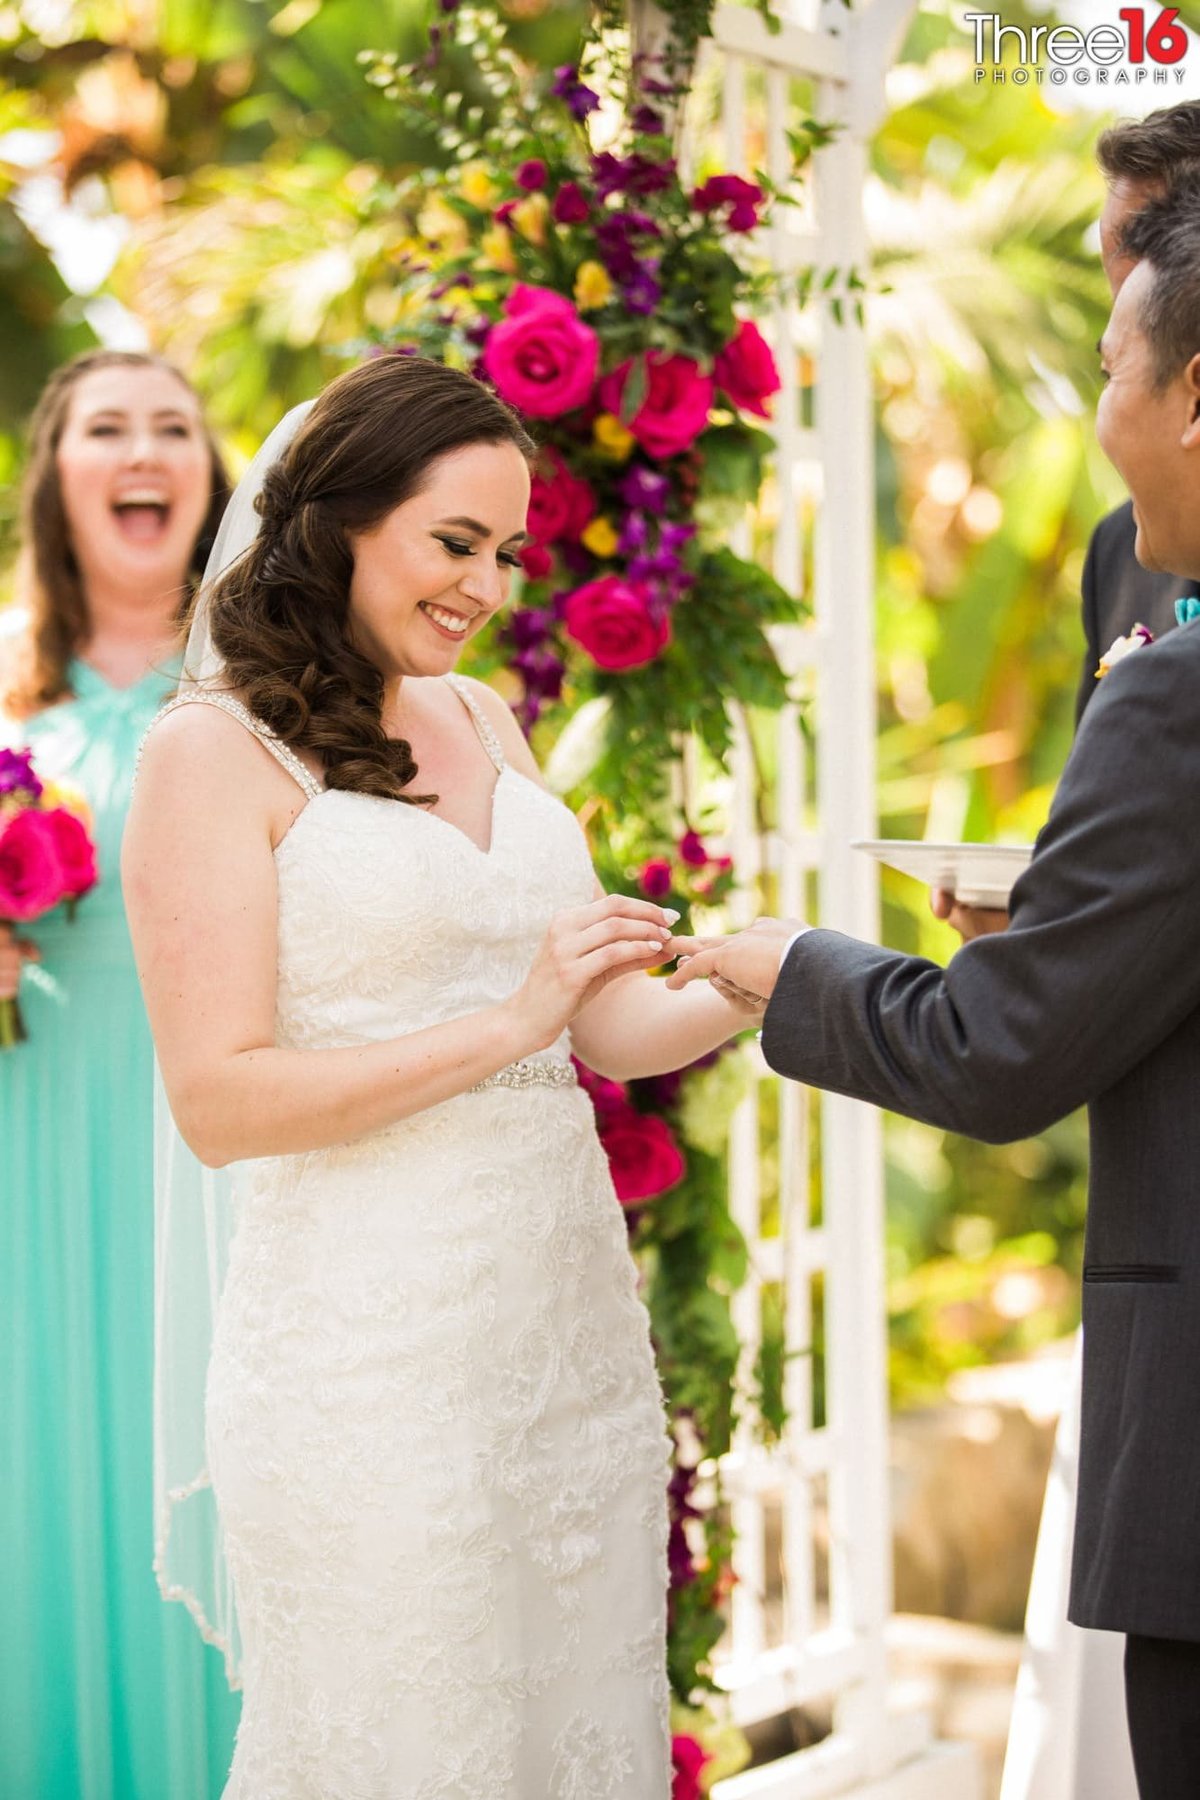 Lot of laughs as Bride places ring on her Groom's finger